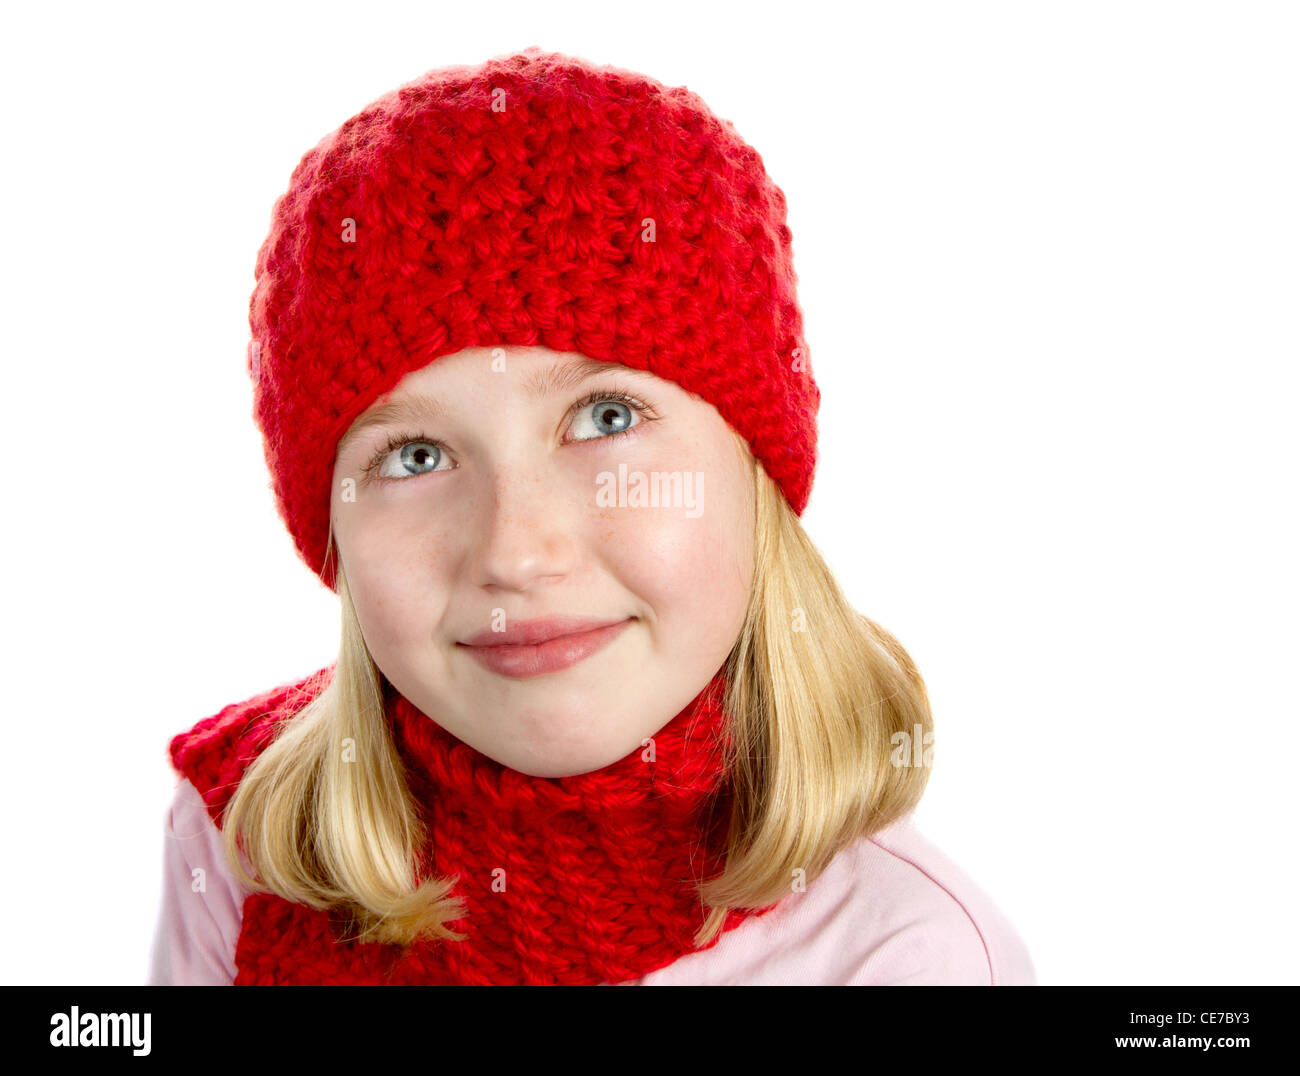 a cute girl wearing a red knit winter hat and a red knit scarf. portrait isolated on a white background. Stock Photo